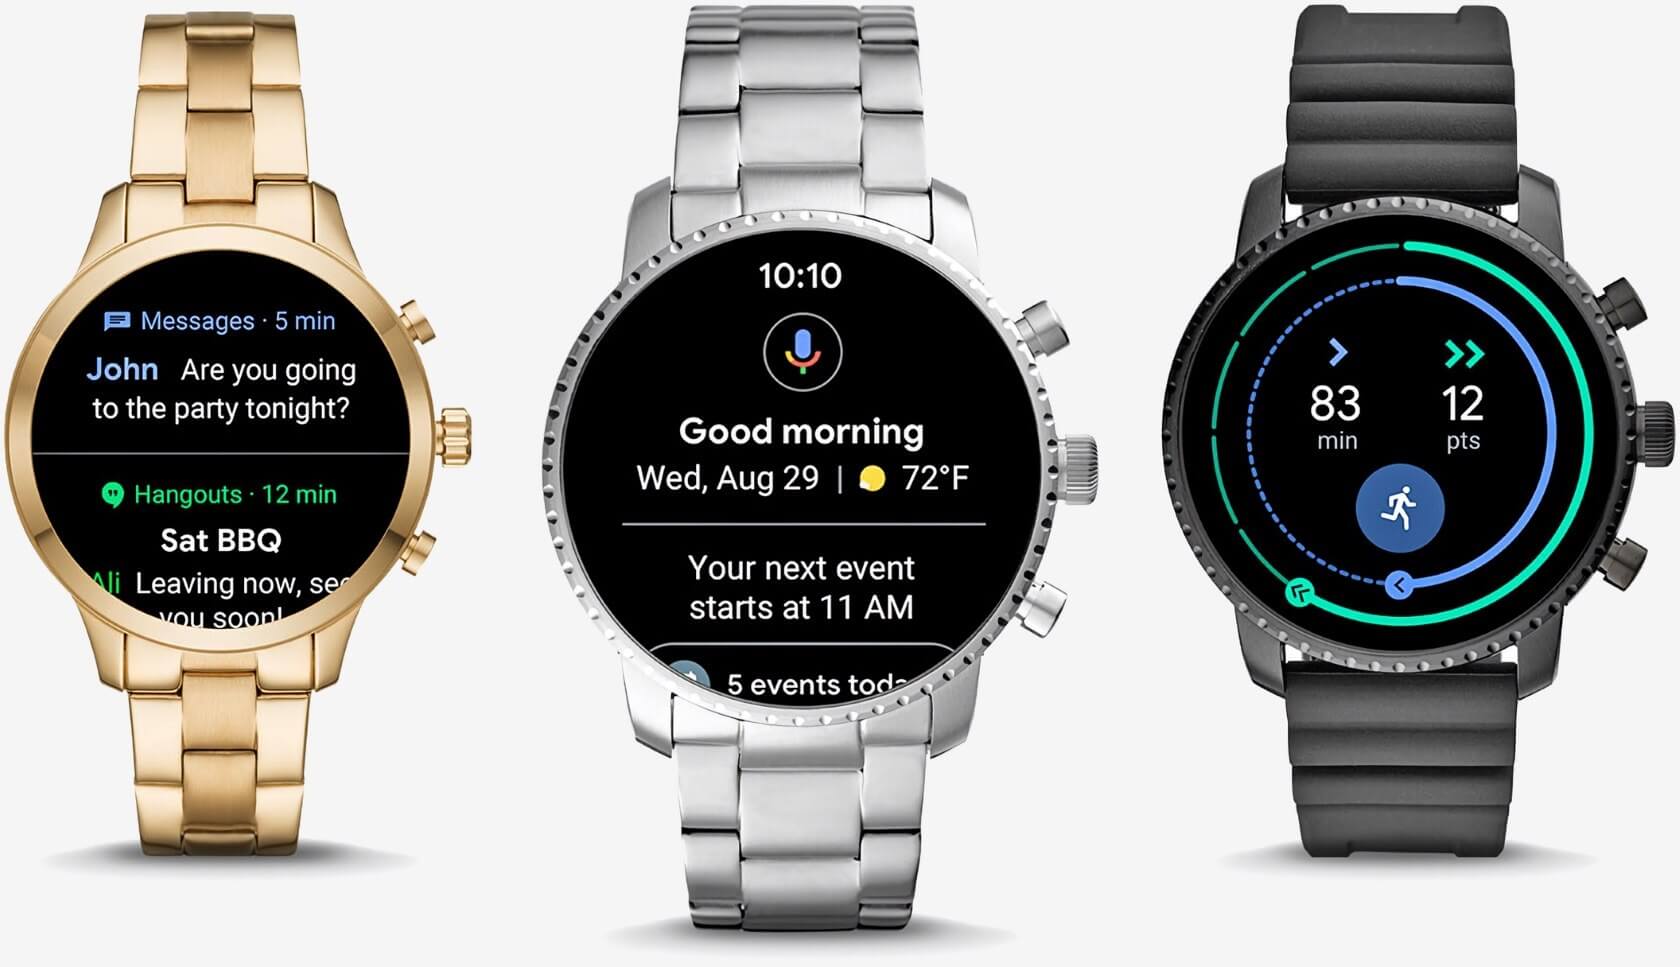 Google to acquire $40 million worth of Fossil's smartwatch tech